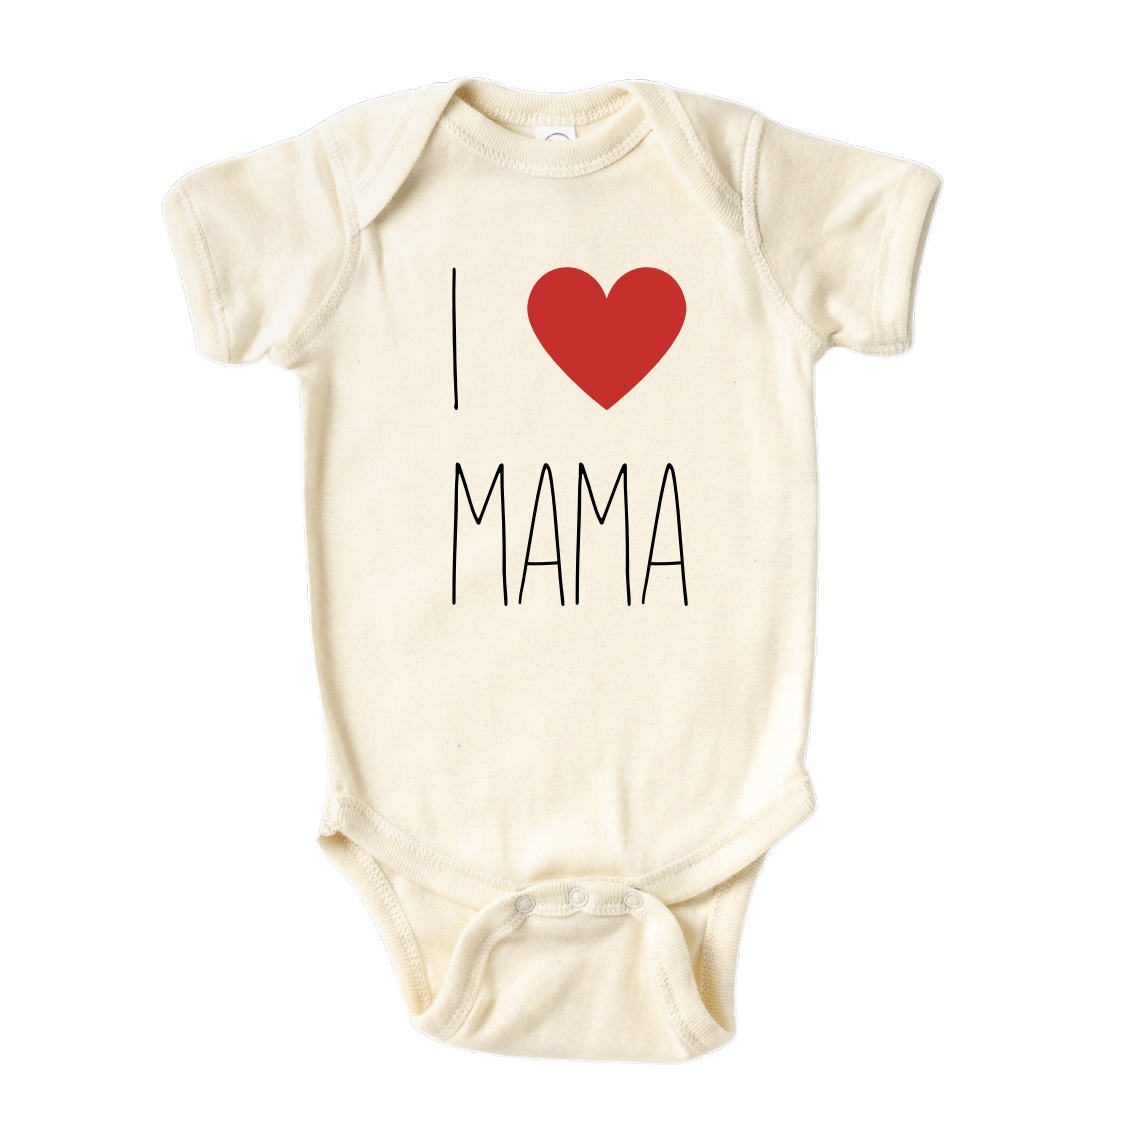 Baby Onesie® I Love Mama Baby Infant Clothing for Baby Shower Gift